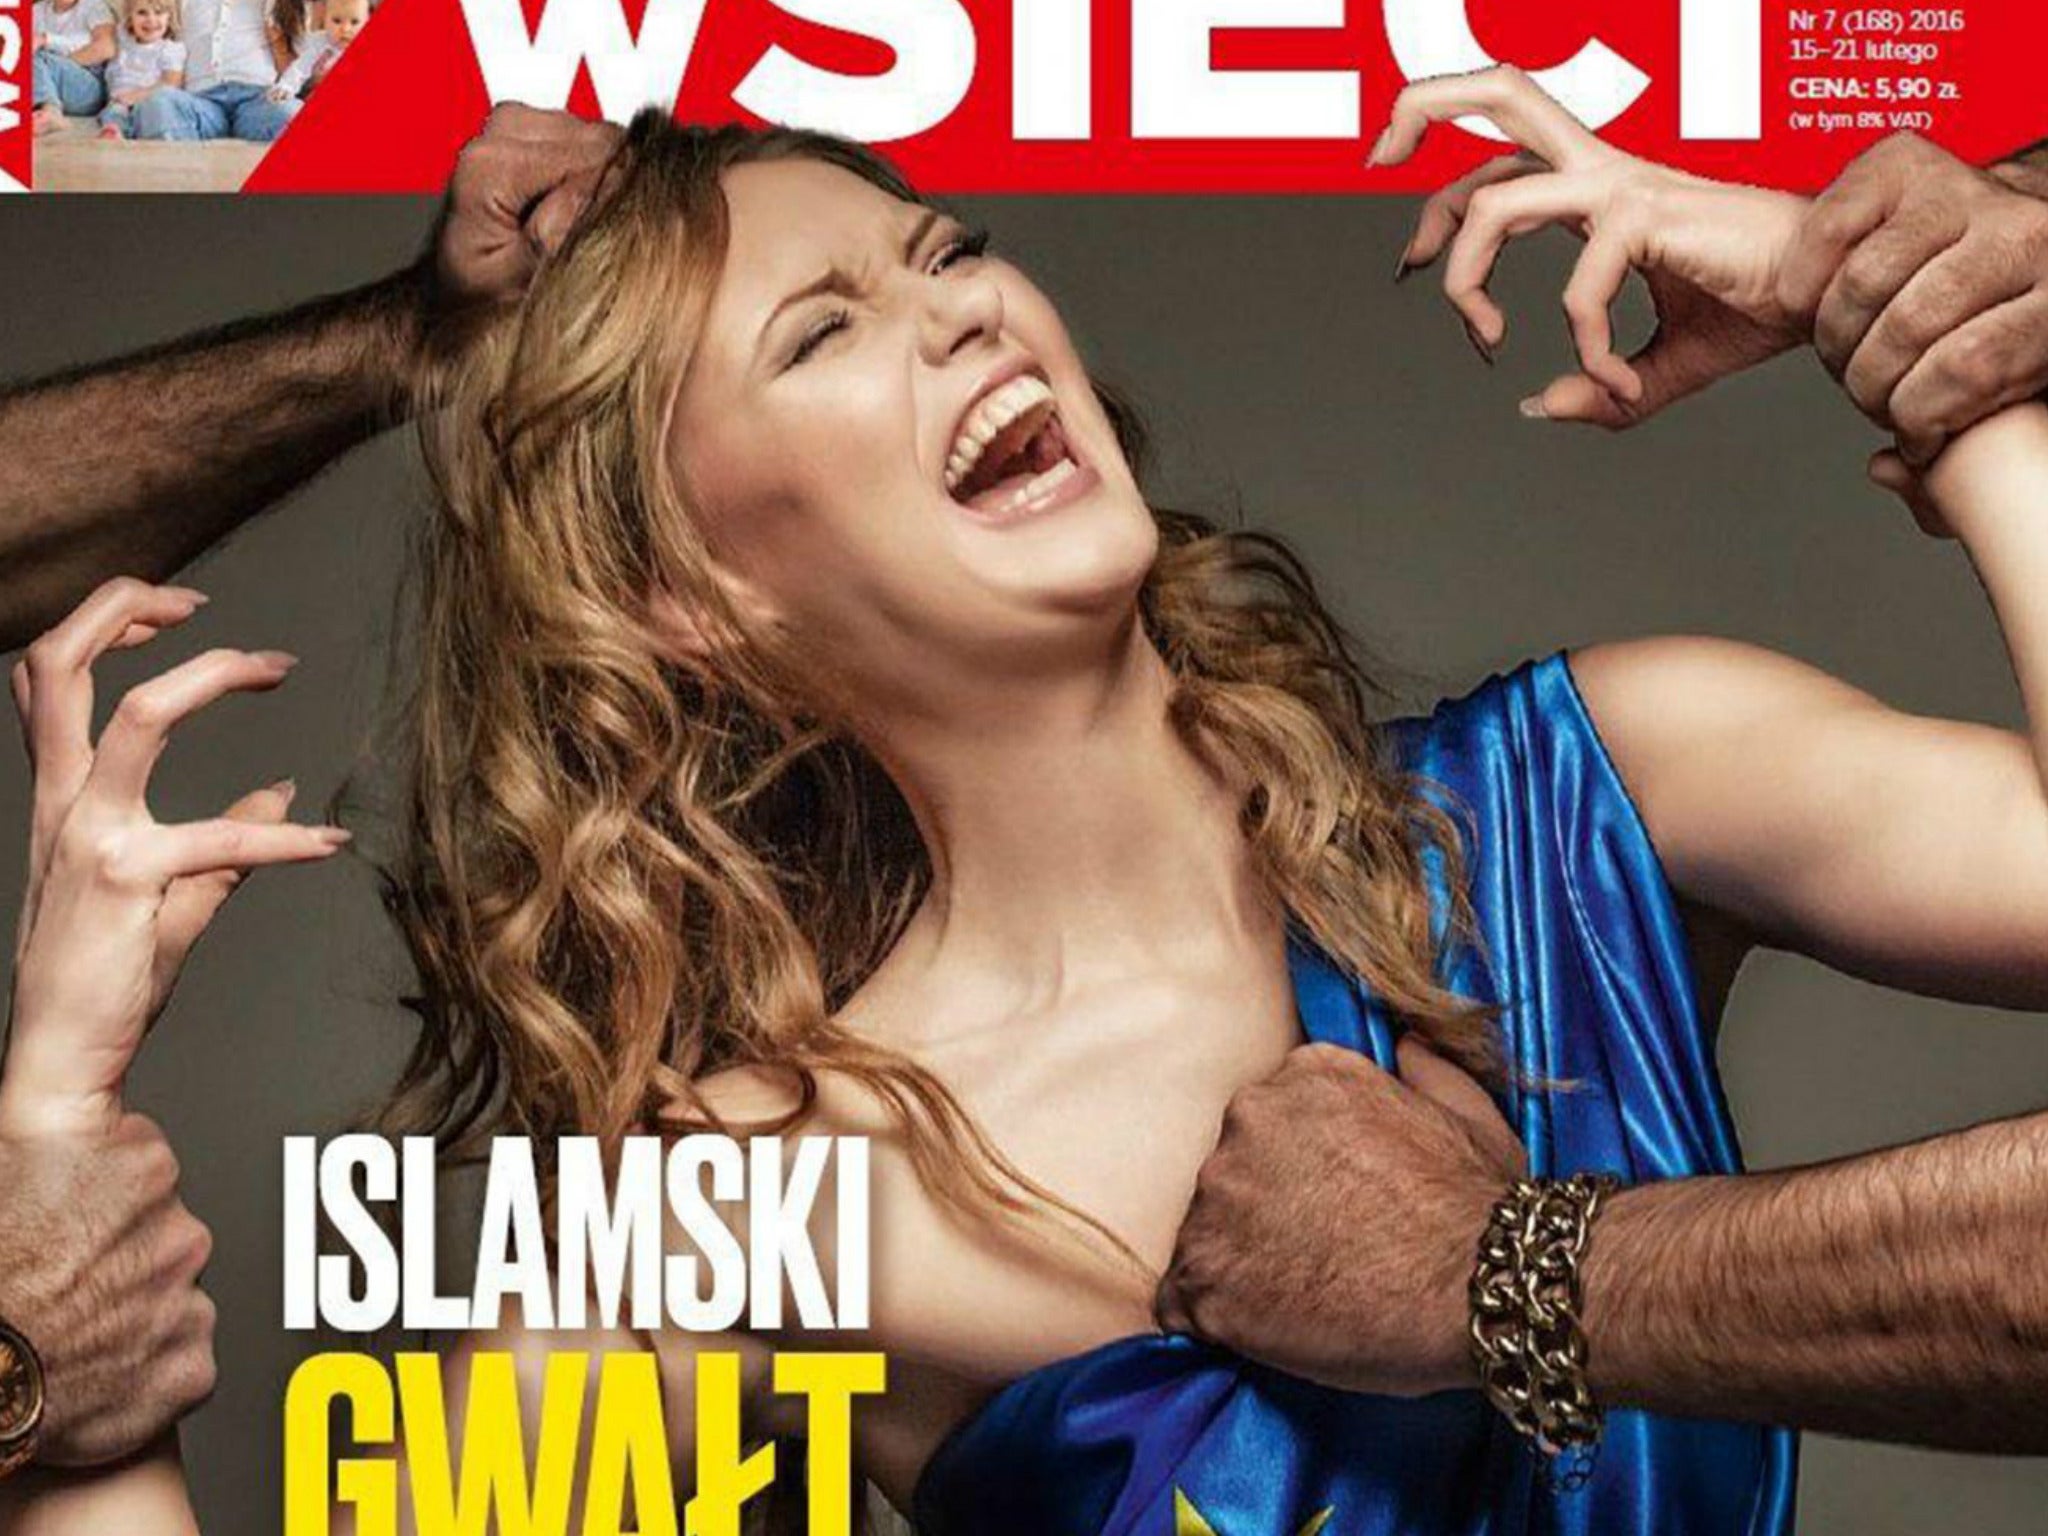 The controversial front cover of wSieci magazine